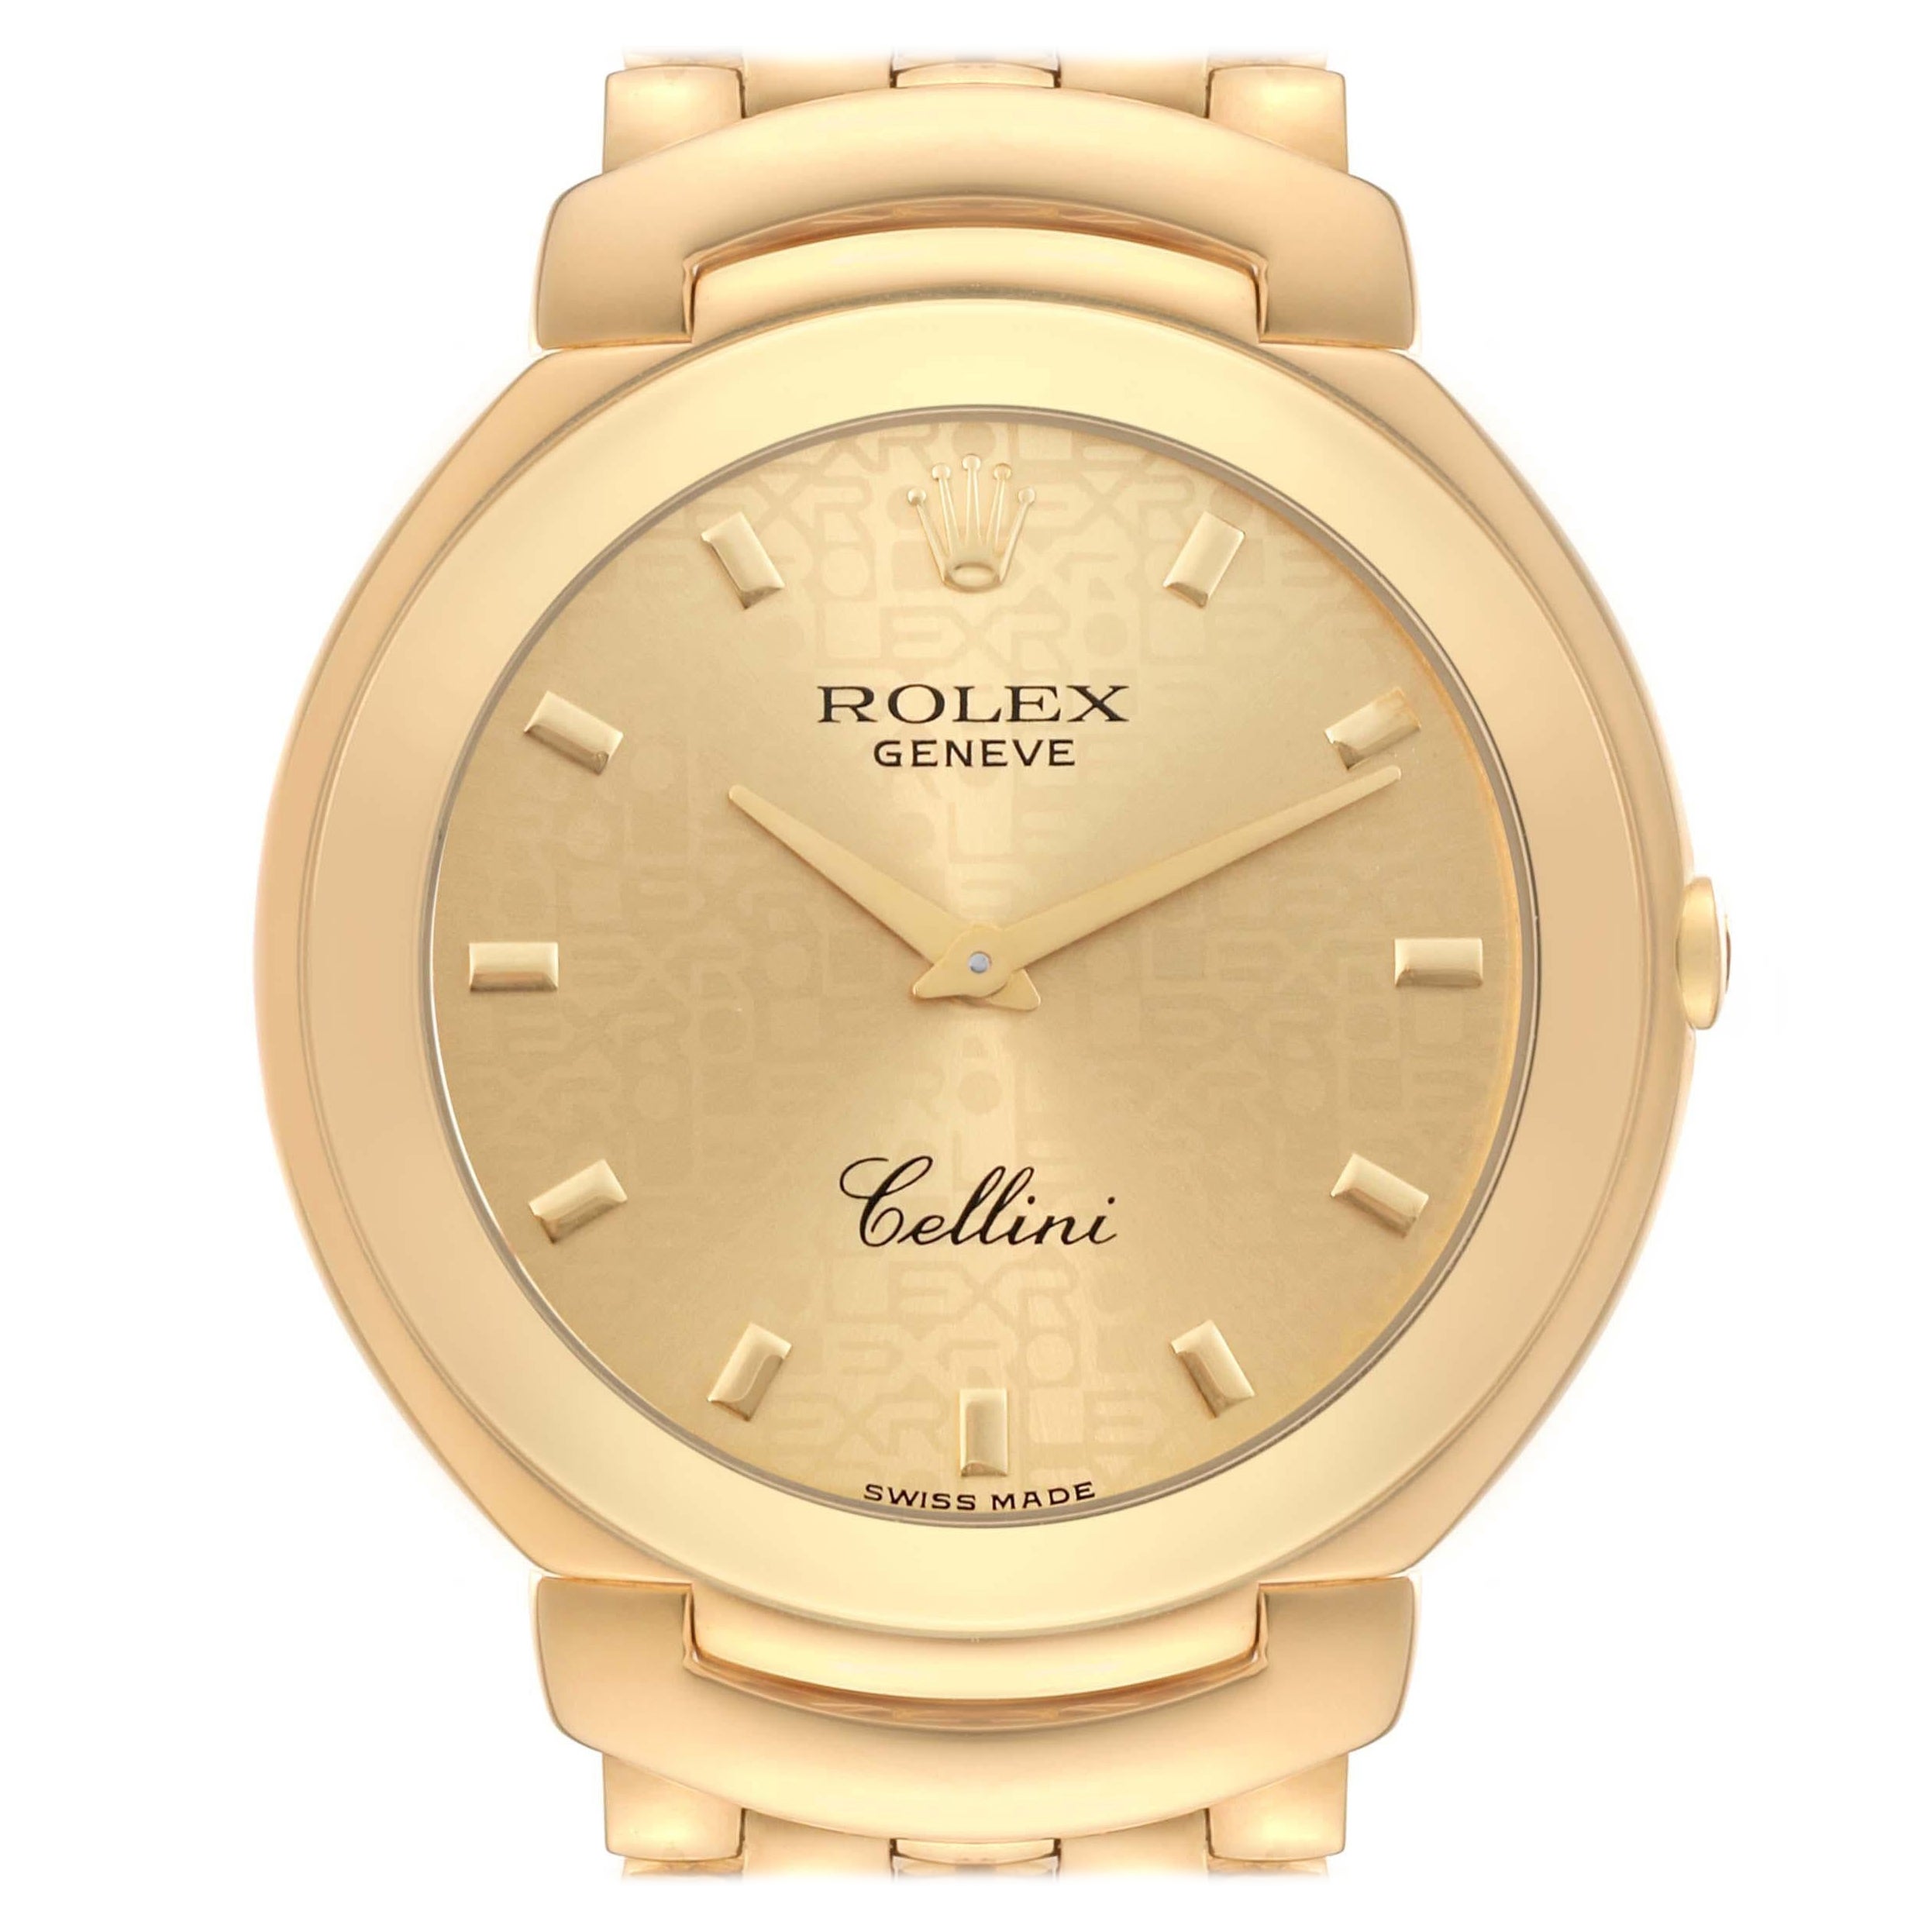 Rolex Cellini Yellow Gold Champagne Anniversary Dial Mens Watch 6623 Box Papers